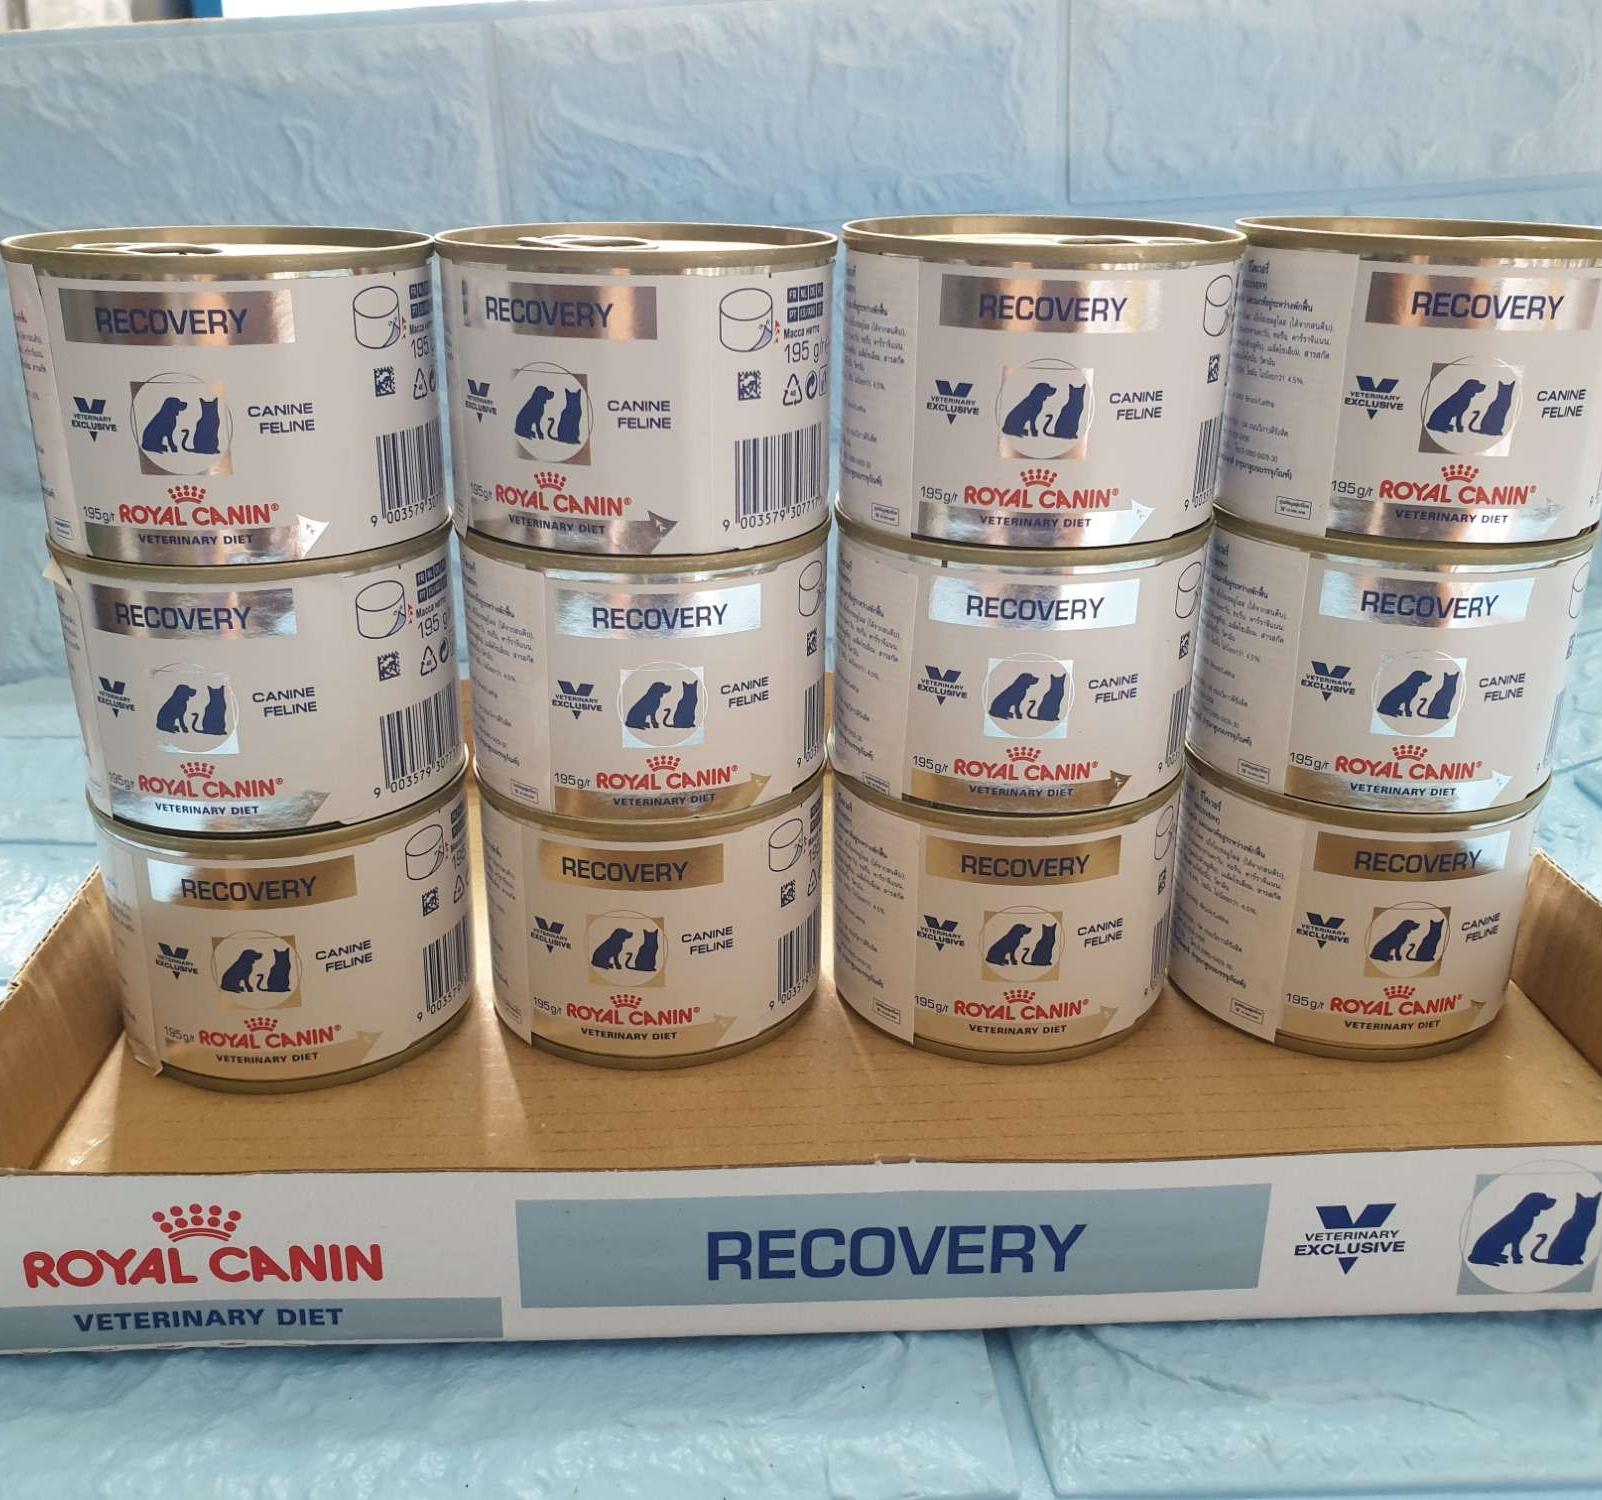 royal canin recovery 195gr